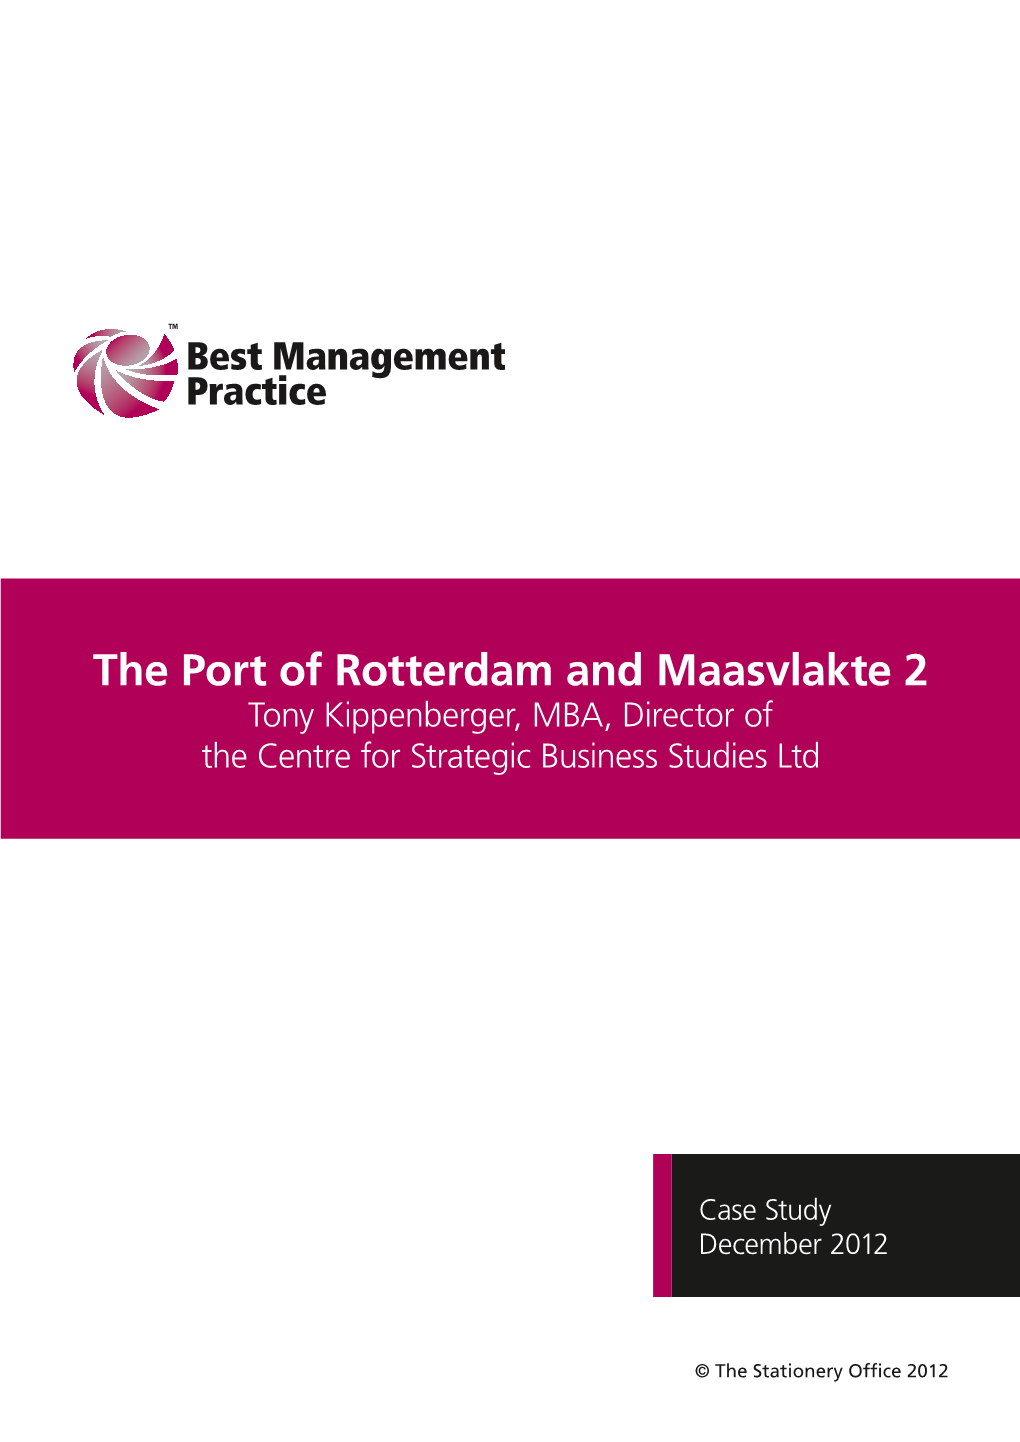 The Port of Rotterdam and Maasvlakte 2 Tony Kippenberger, MBA, Director of the Centre for Strategic Business Studies Ltd